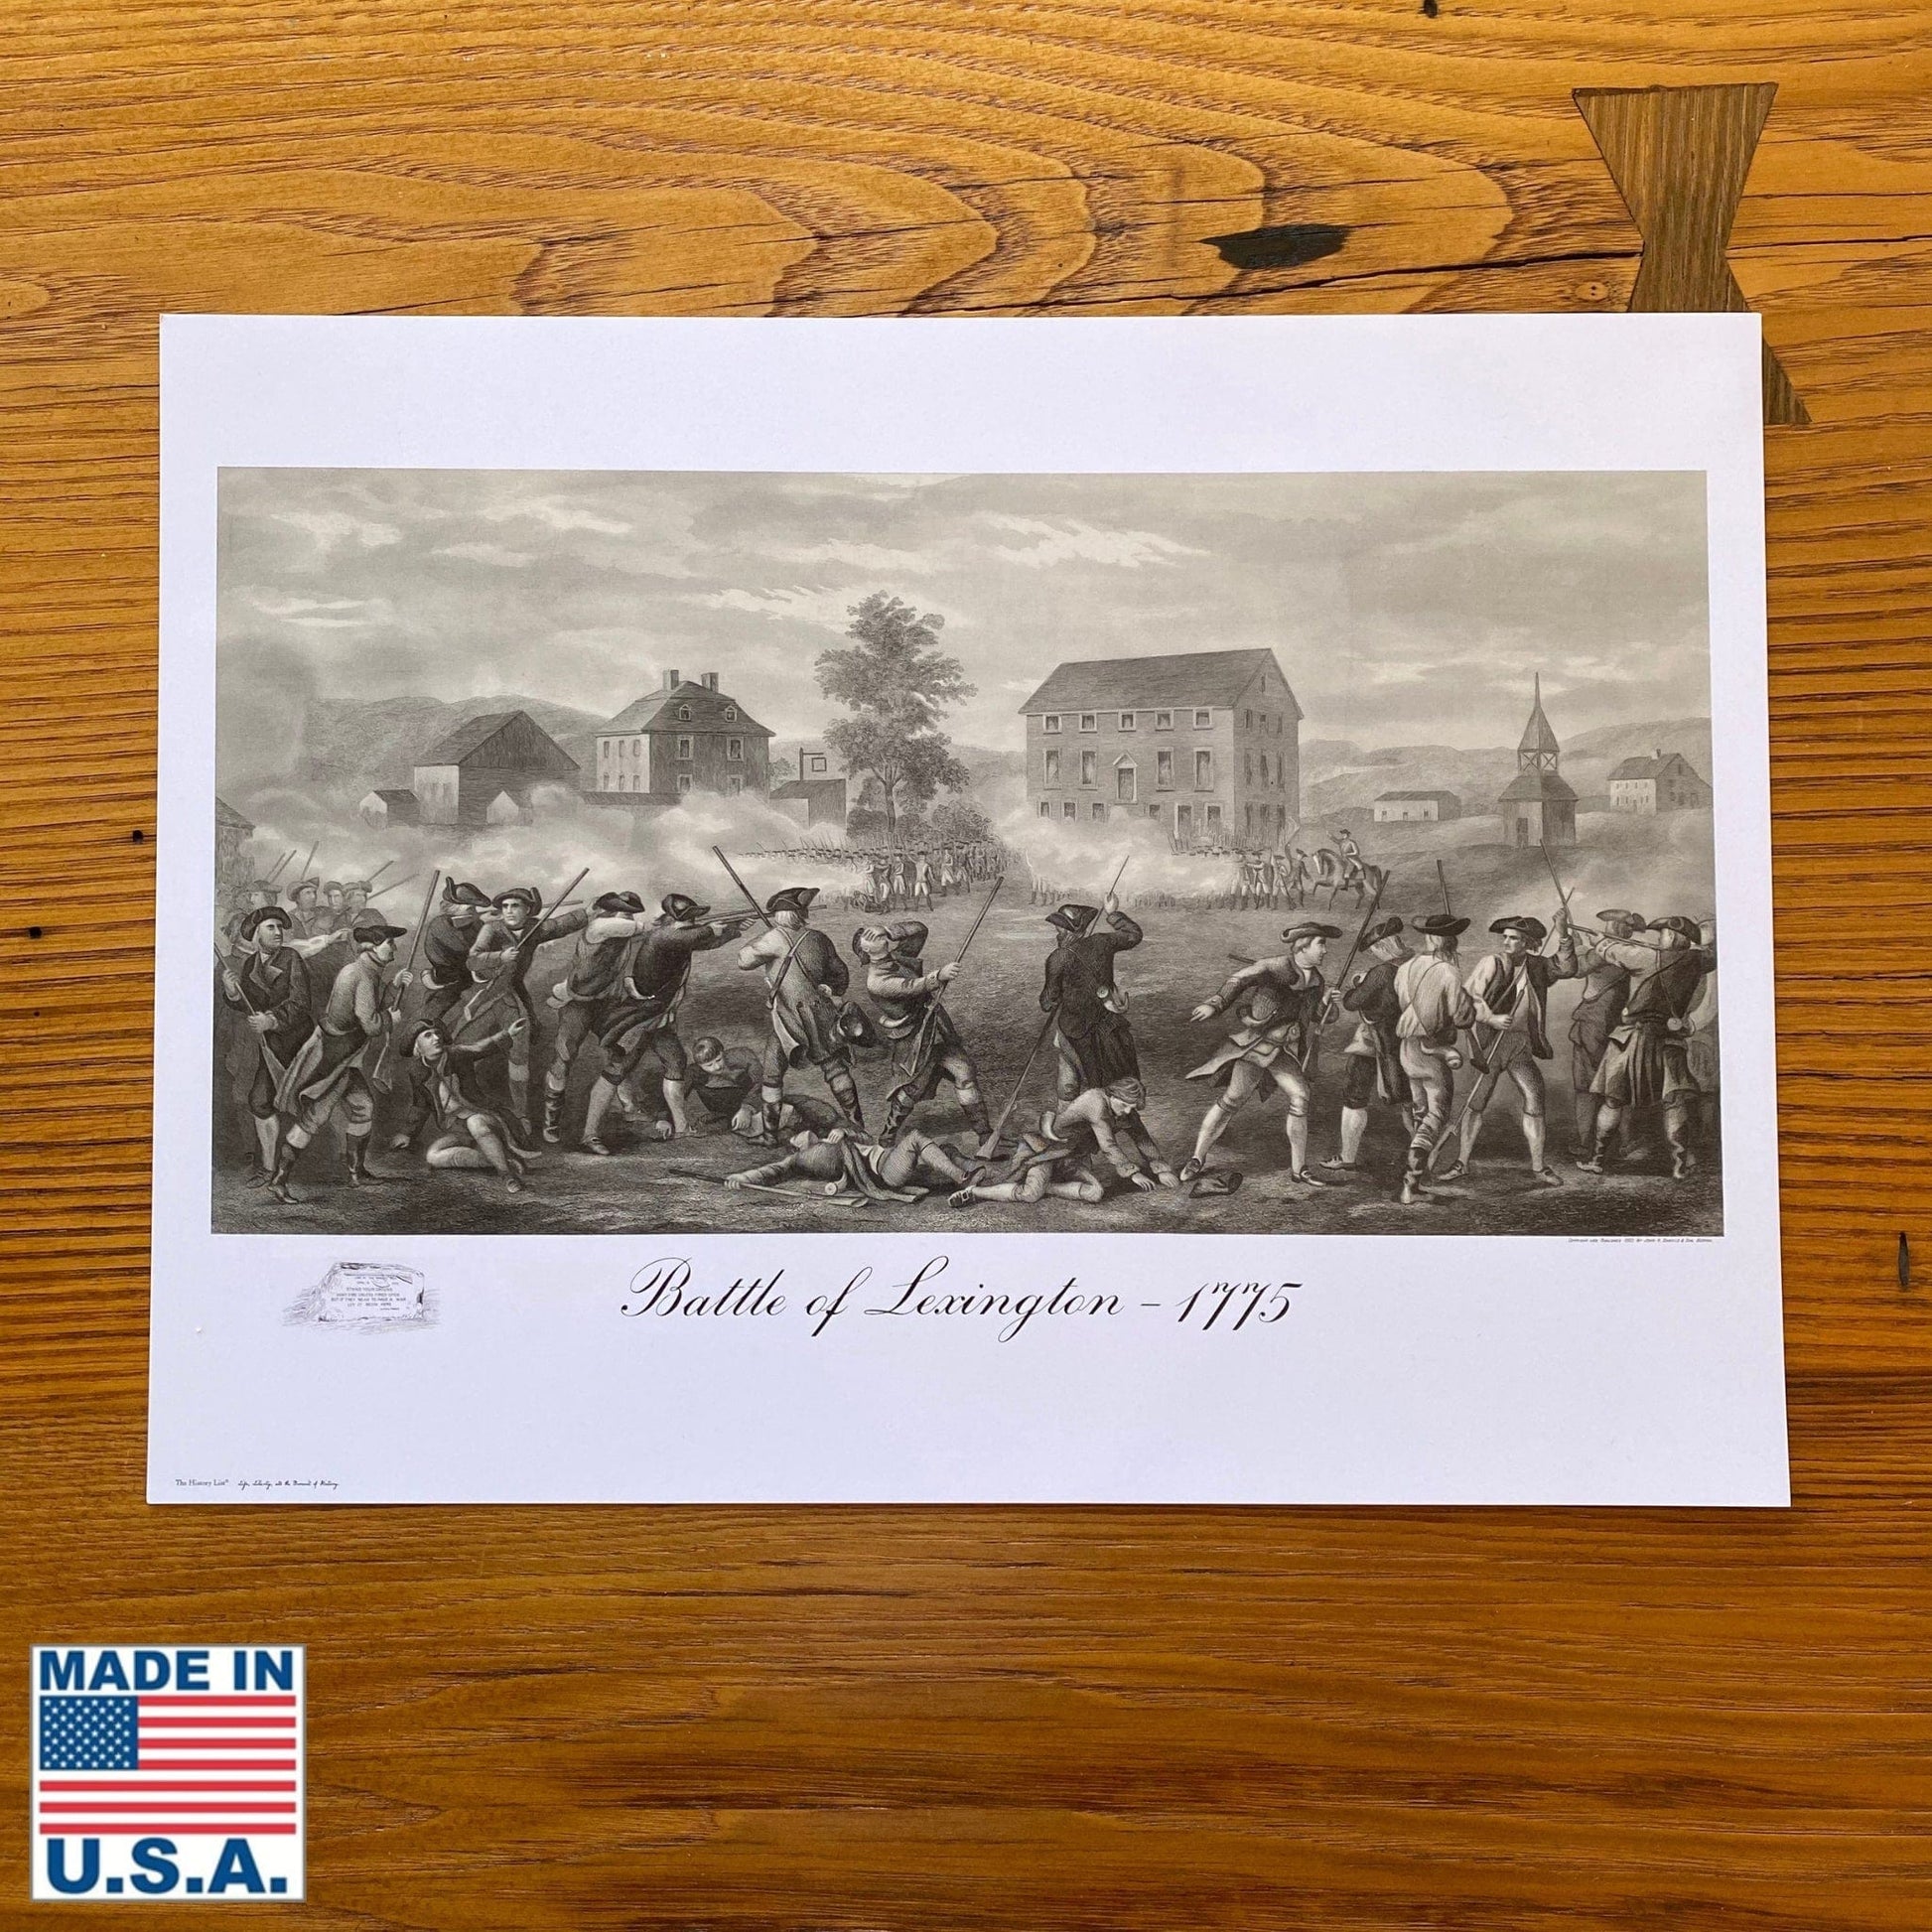 "Battle of Lexington 1775" small poster from the History List Store